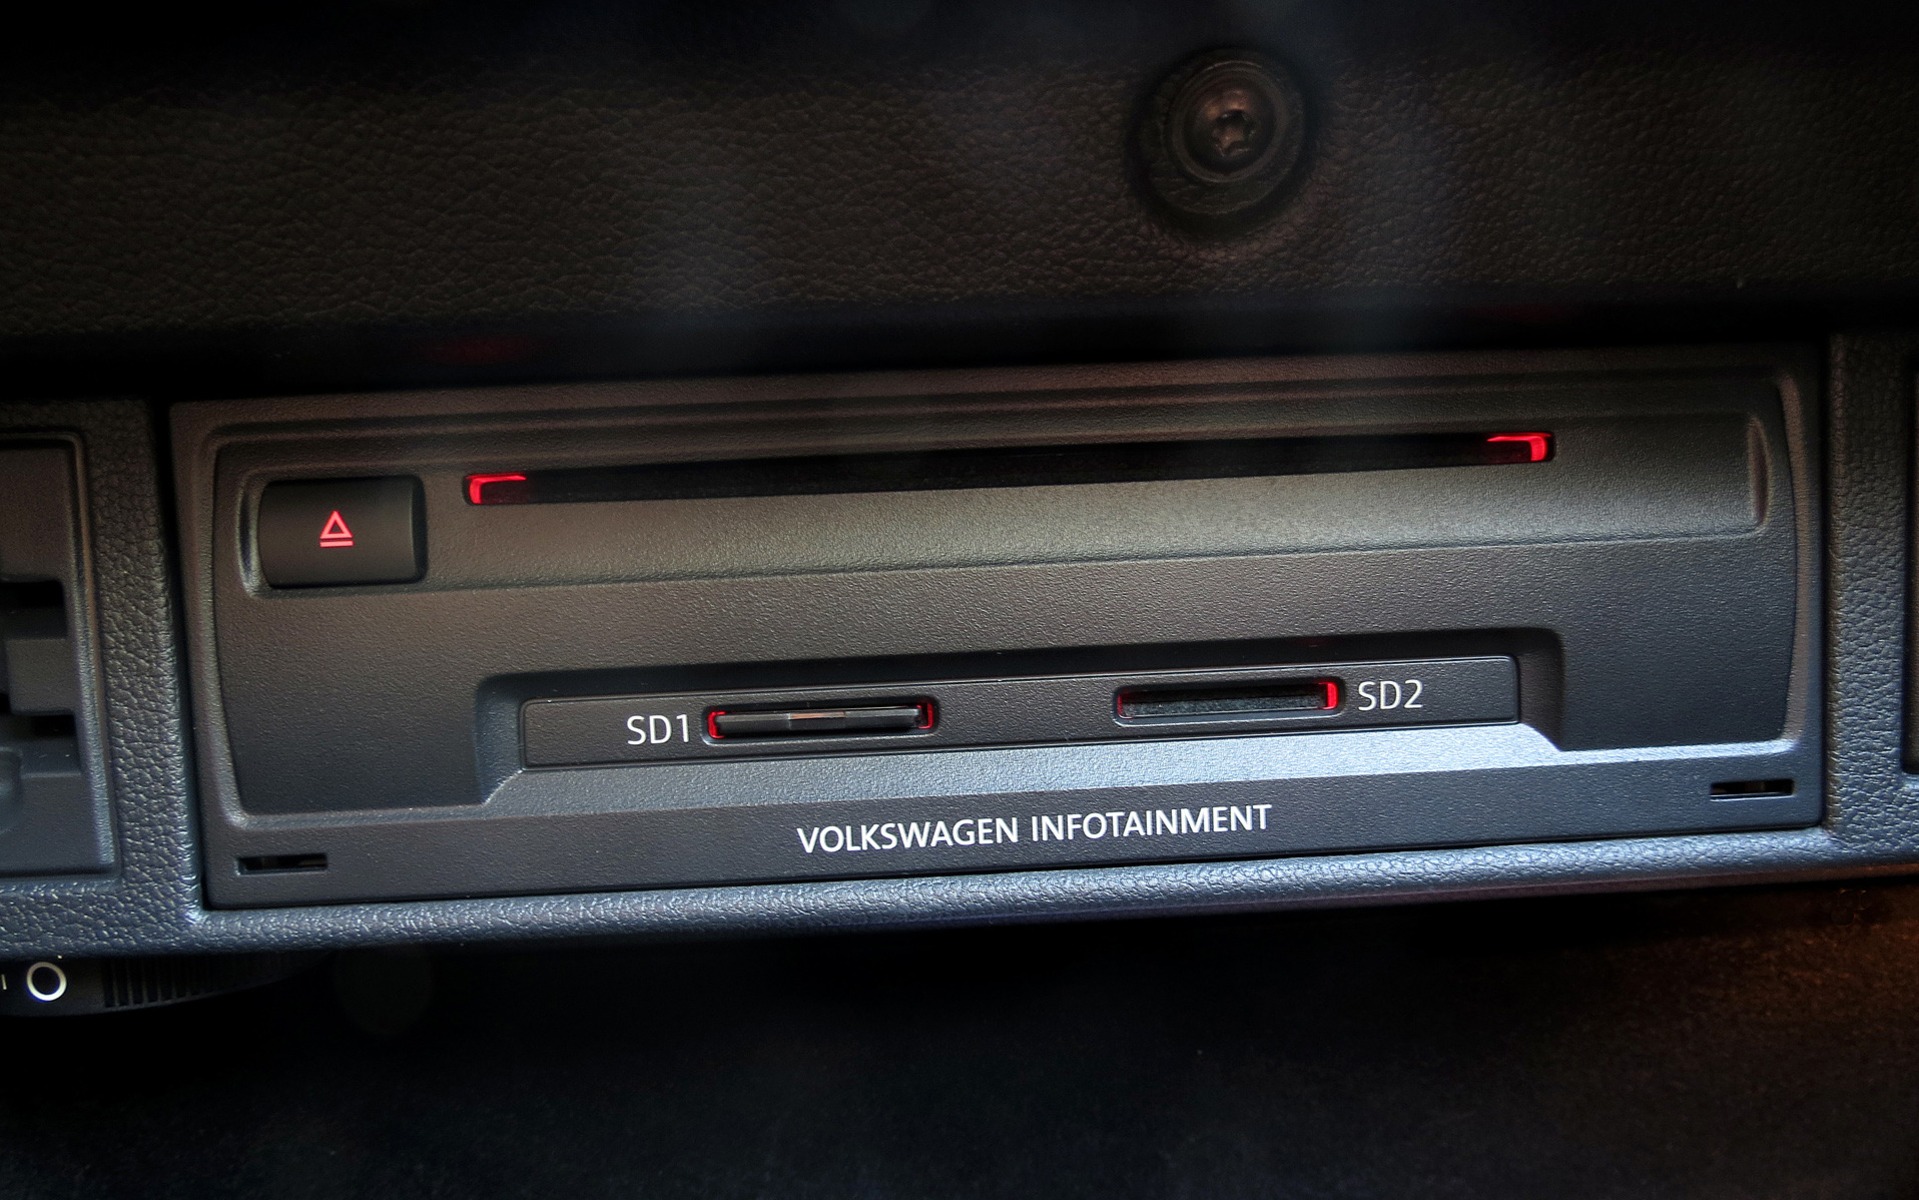 A DVD player for the GPS and two slots for SD cards in the glovebox.